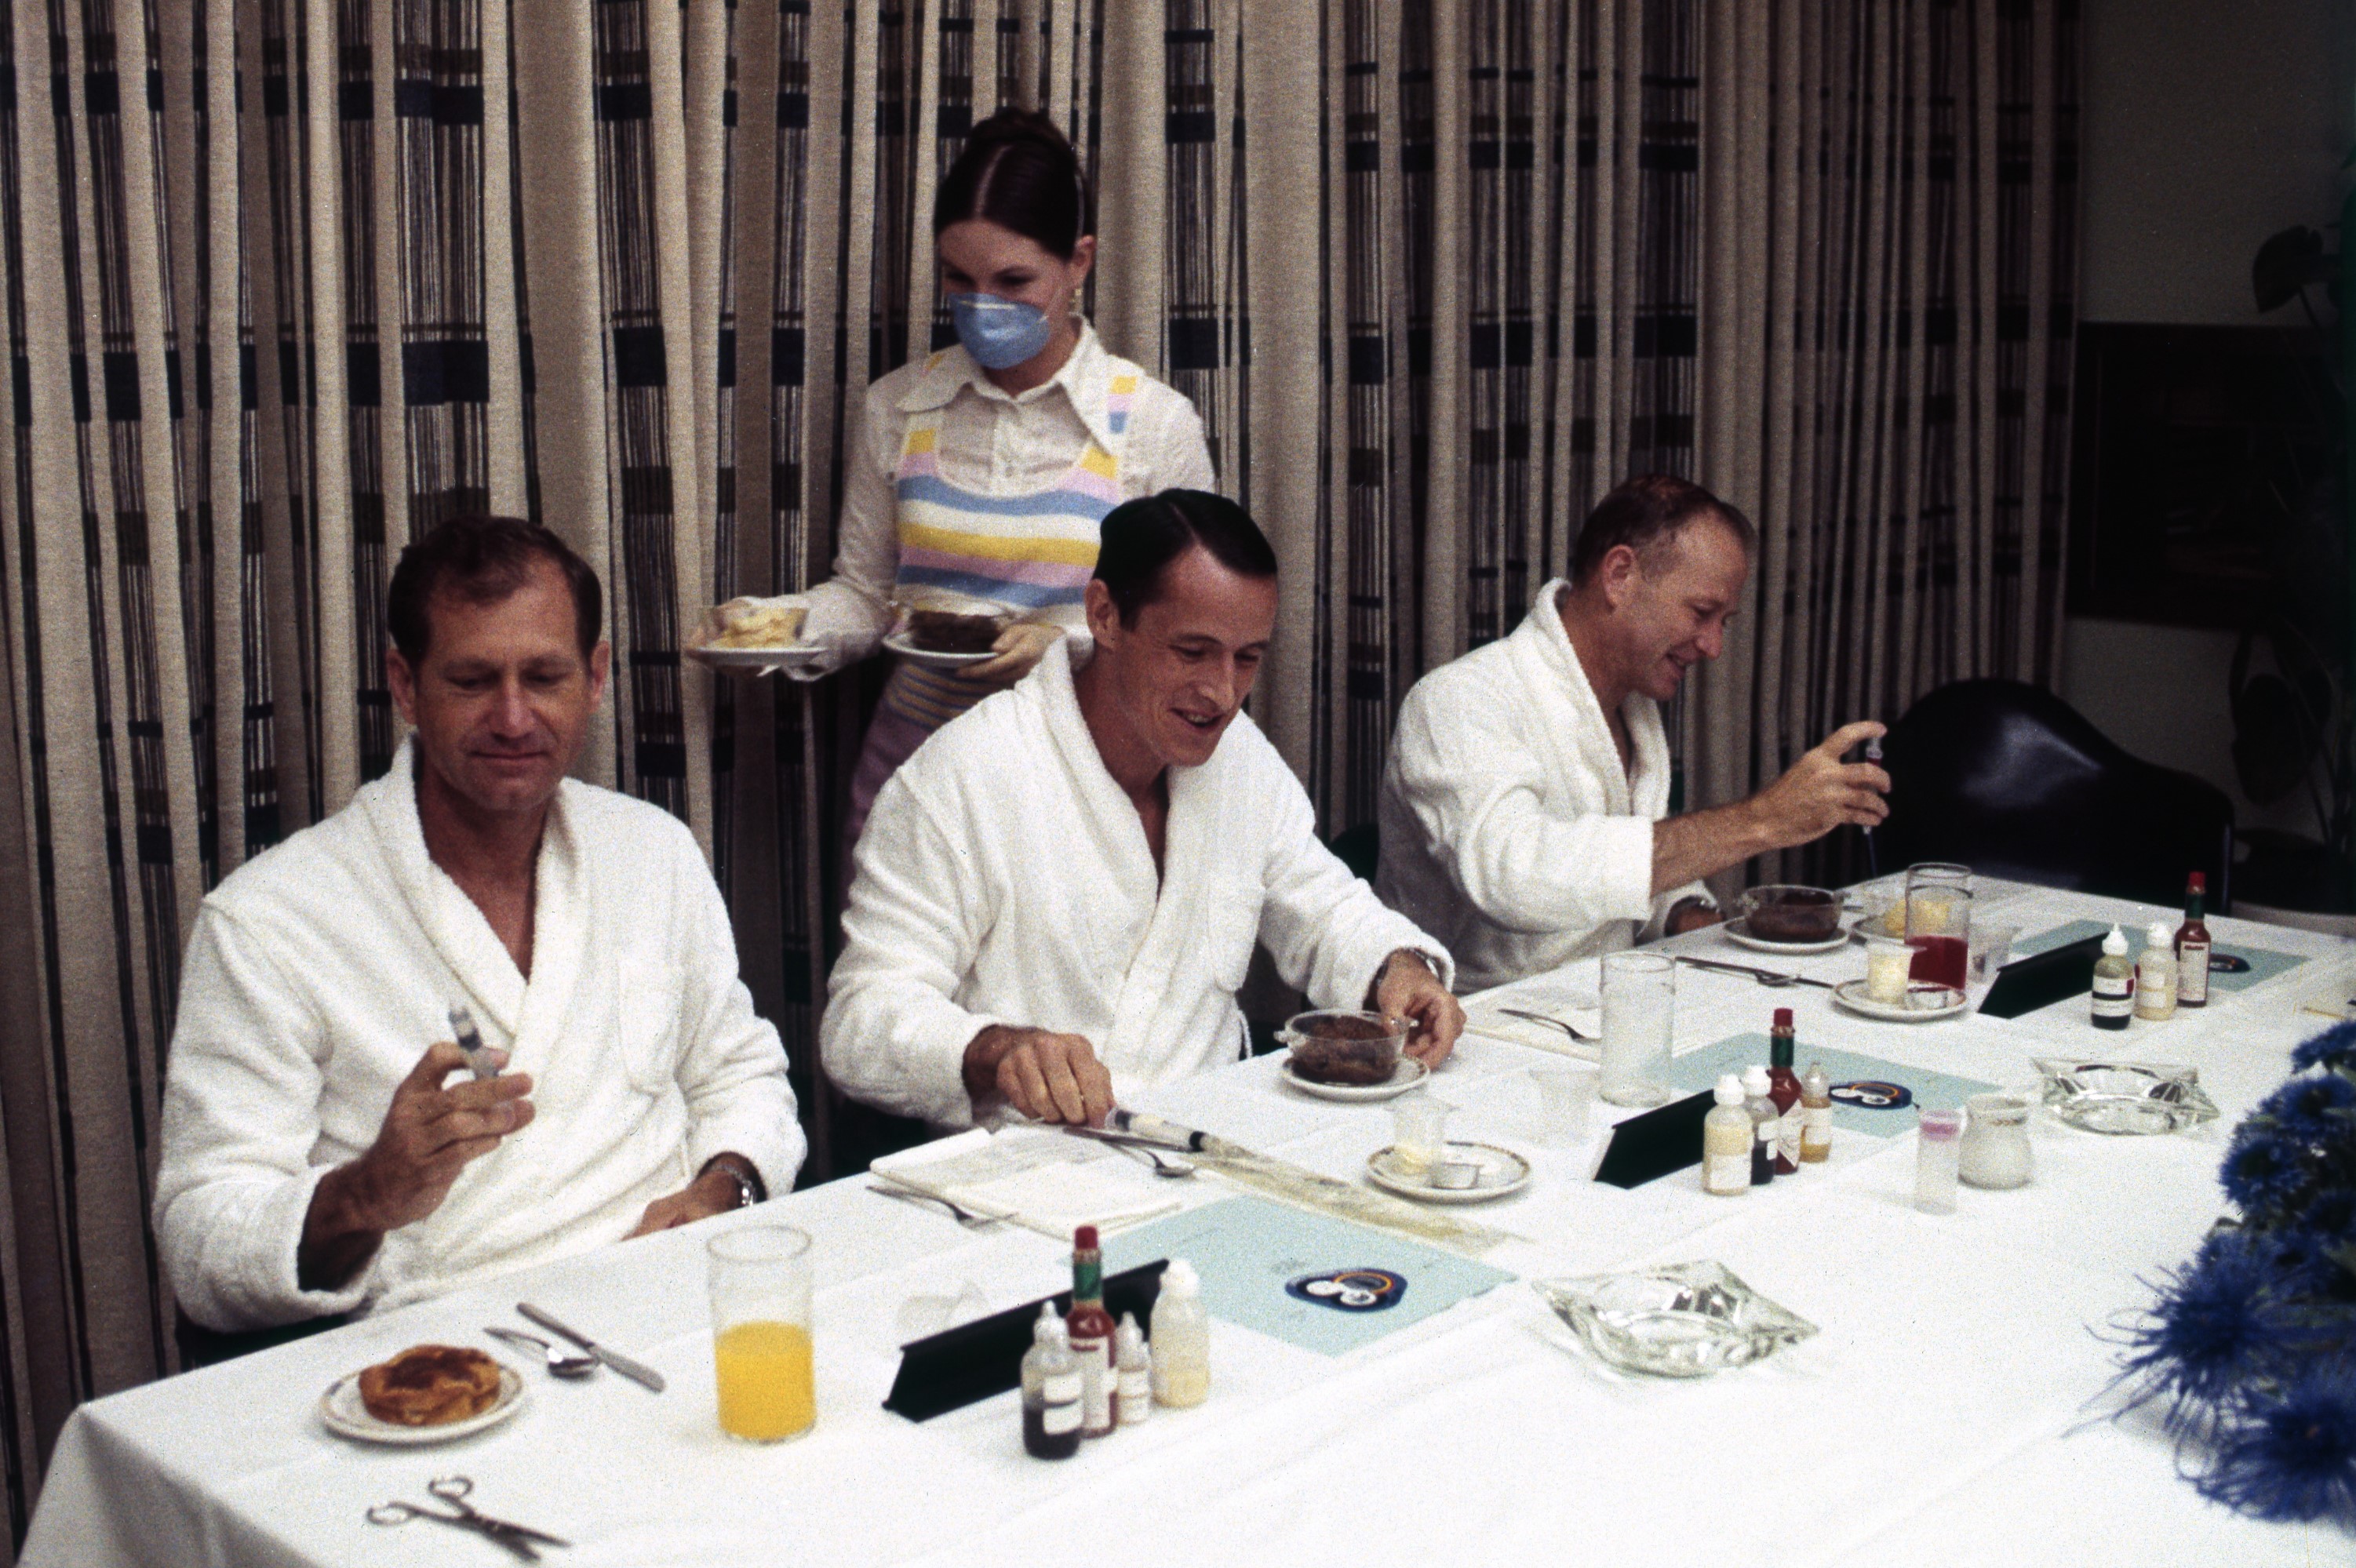 Photo of Skylab 4 astronauts William R. Pogue, left, Edward G. Gibson, and Gerald P. Carr enjoy the traditional prelaunch breakfast